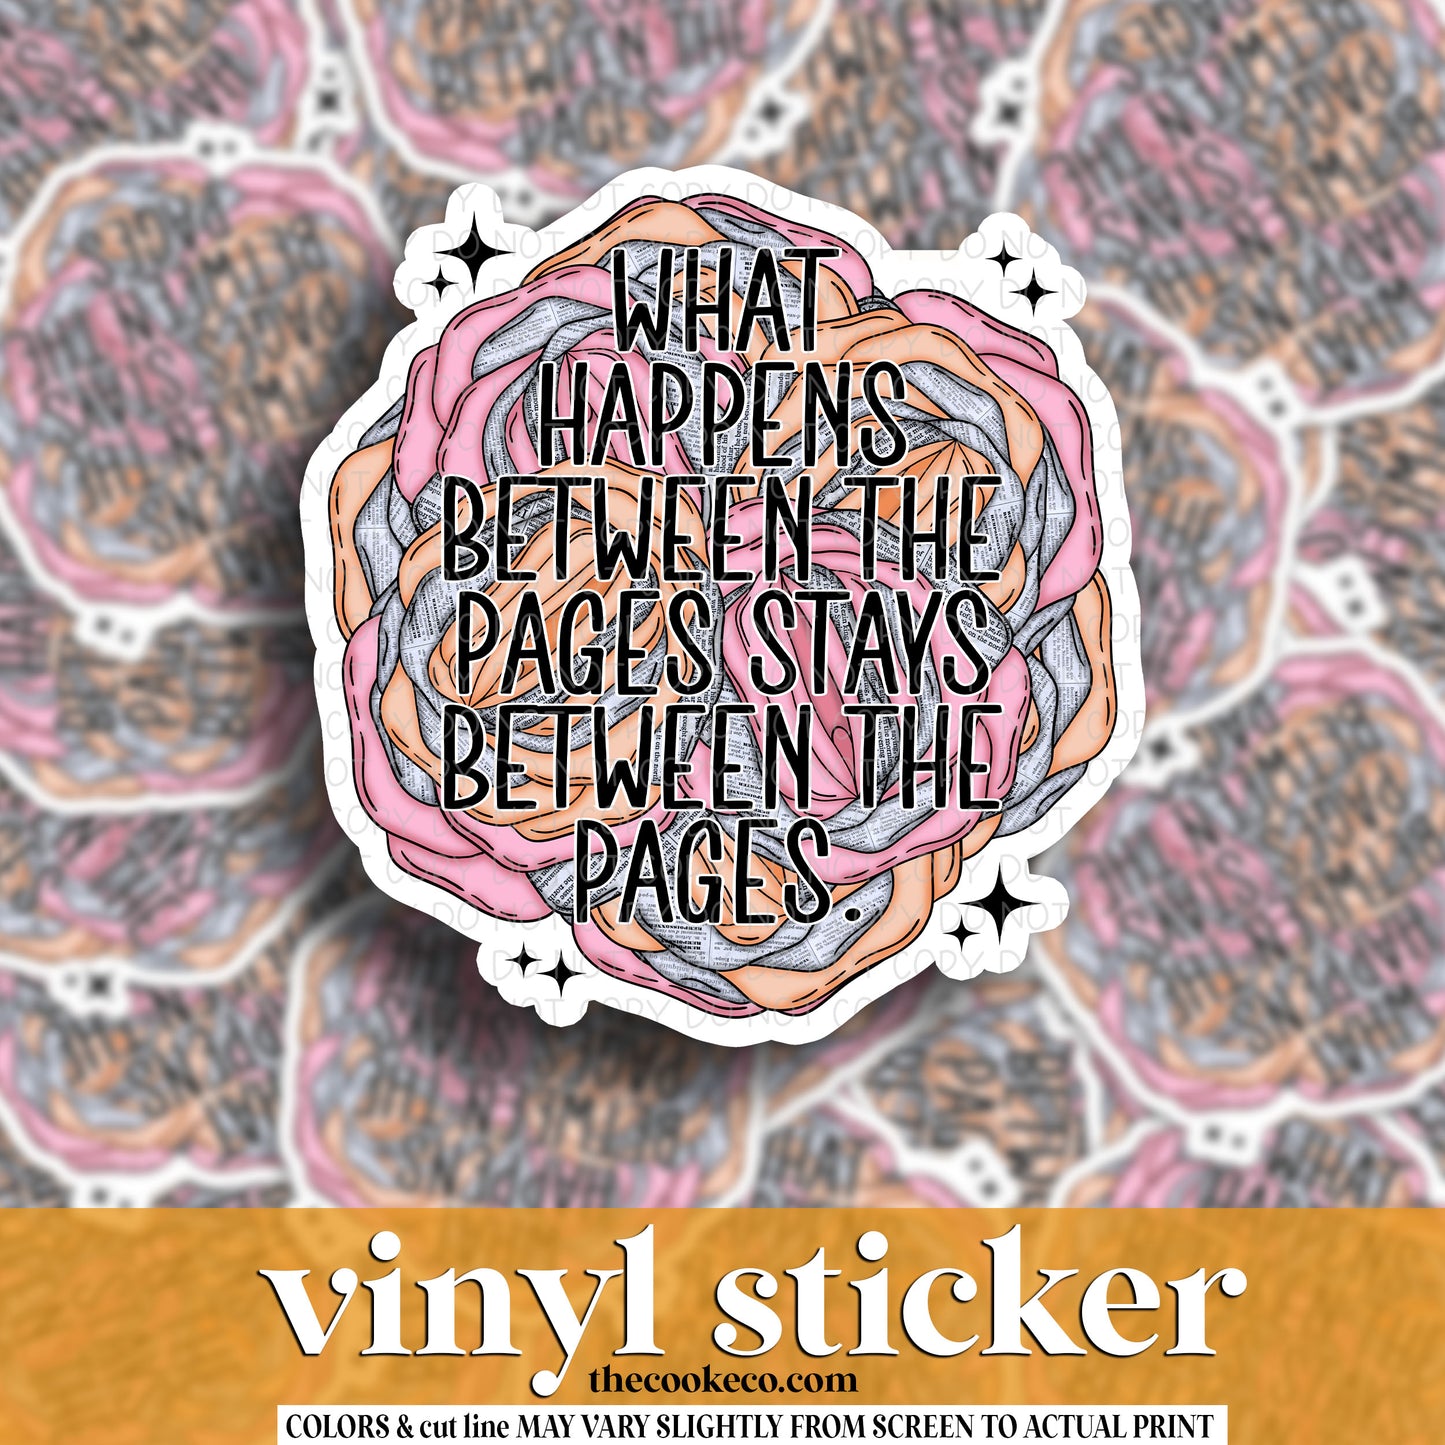 Vinyl Sticker | #V1305 - WHAT HAPPENS BETWEEN THE PAGES